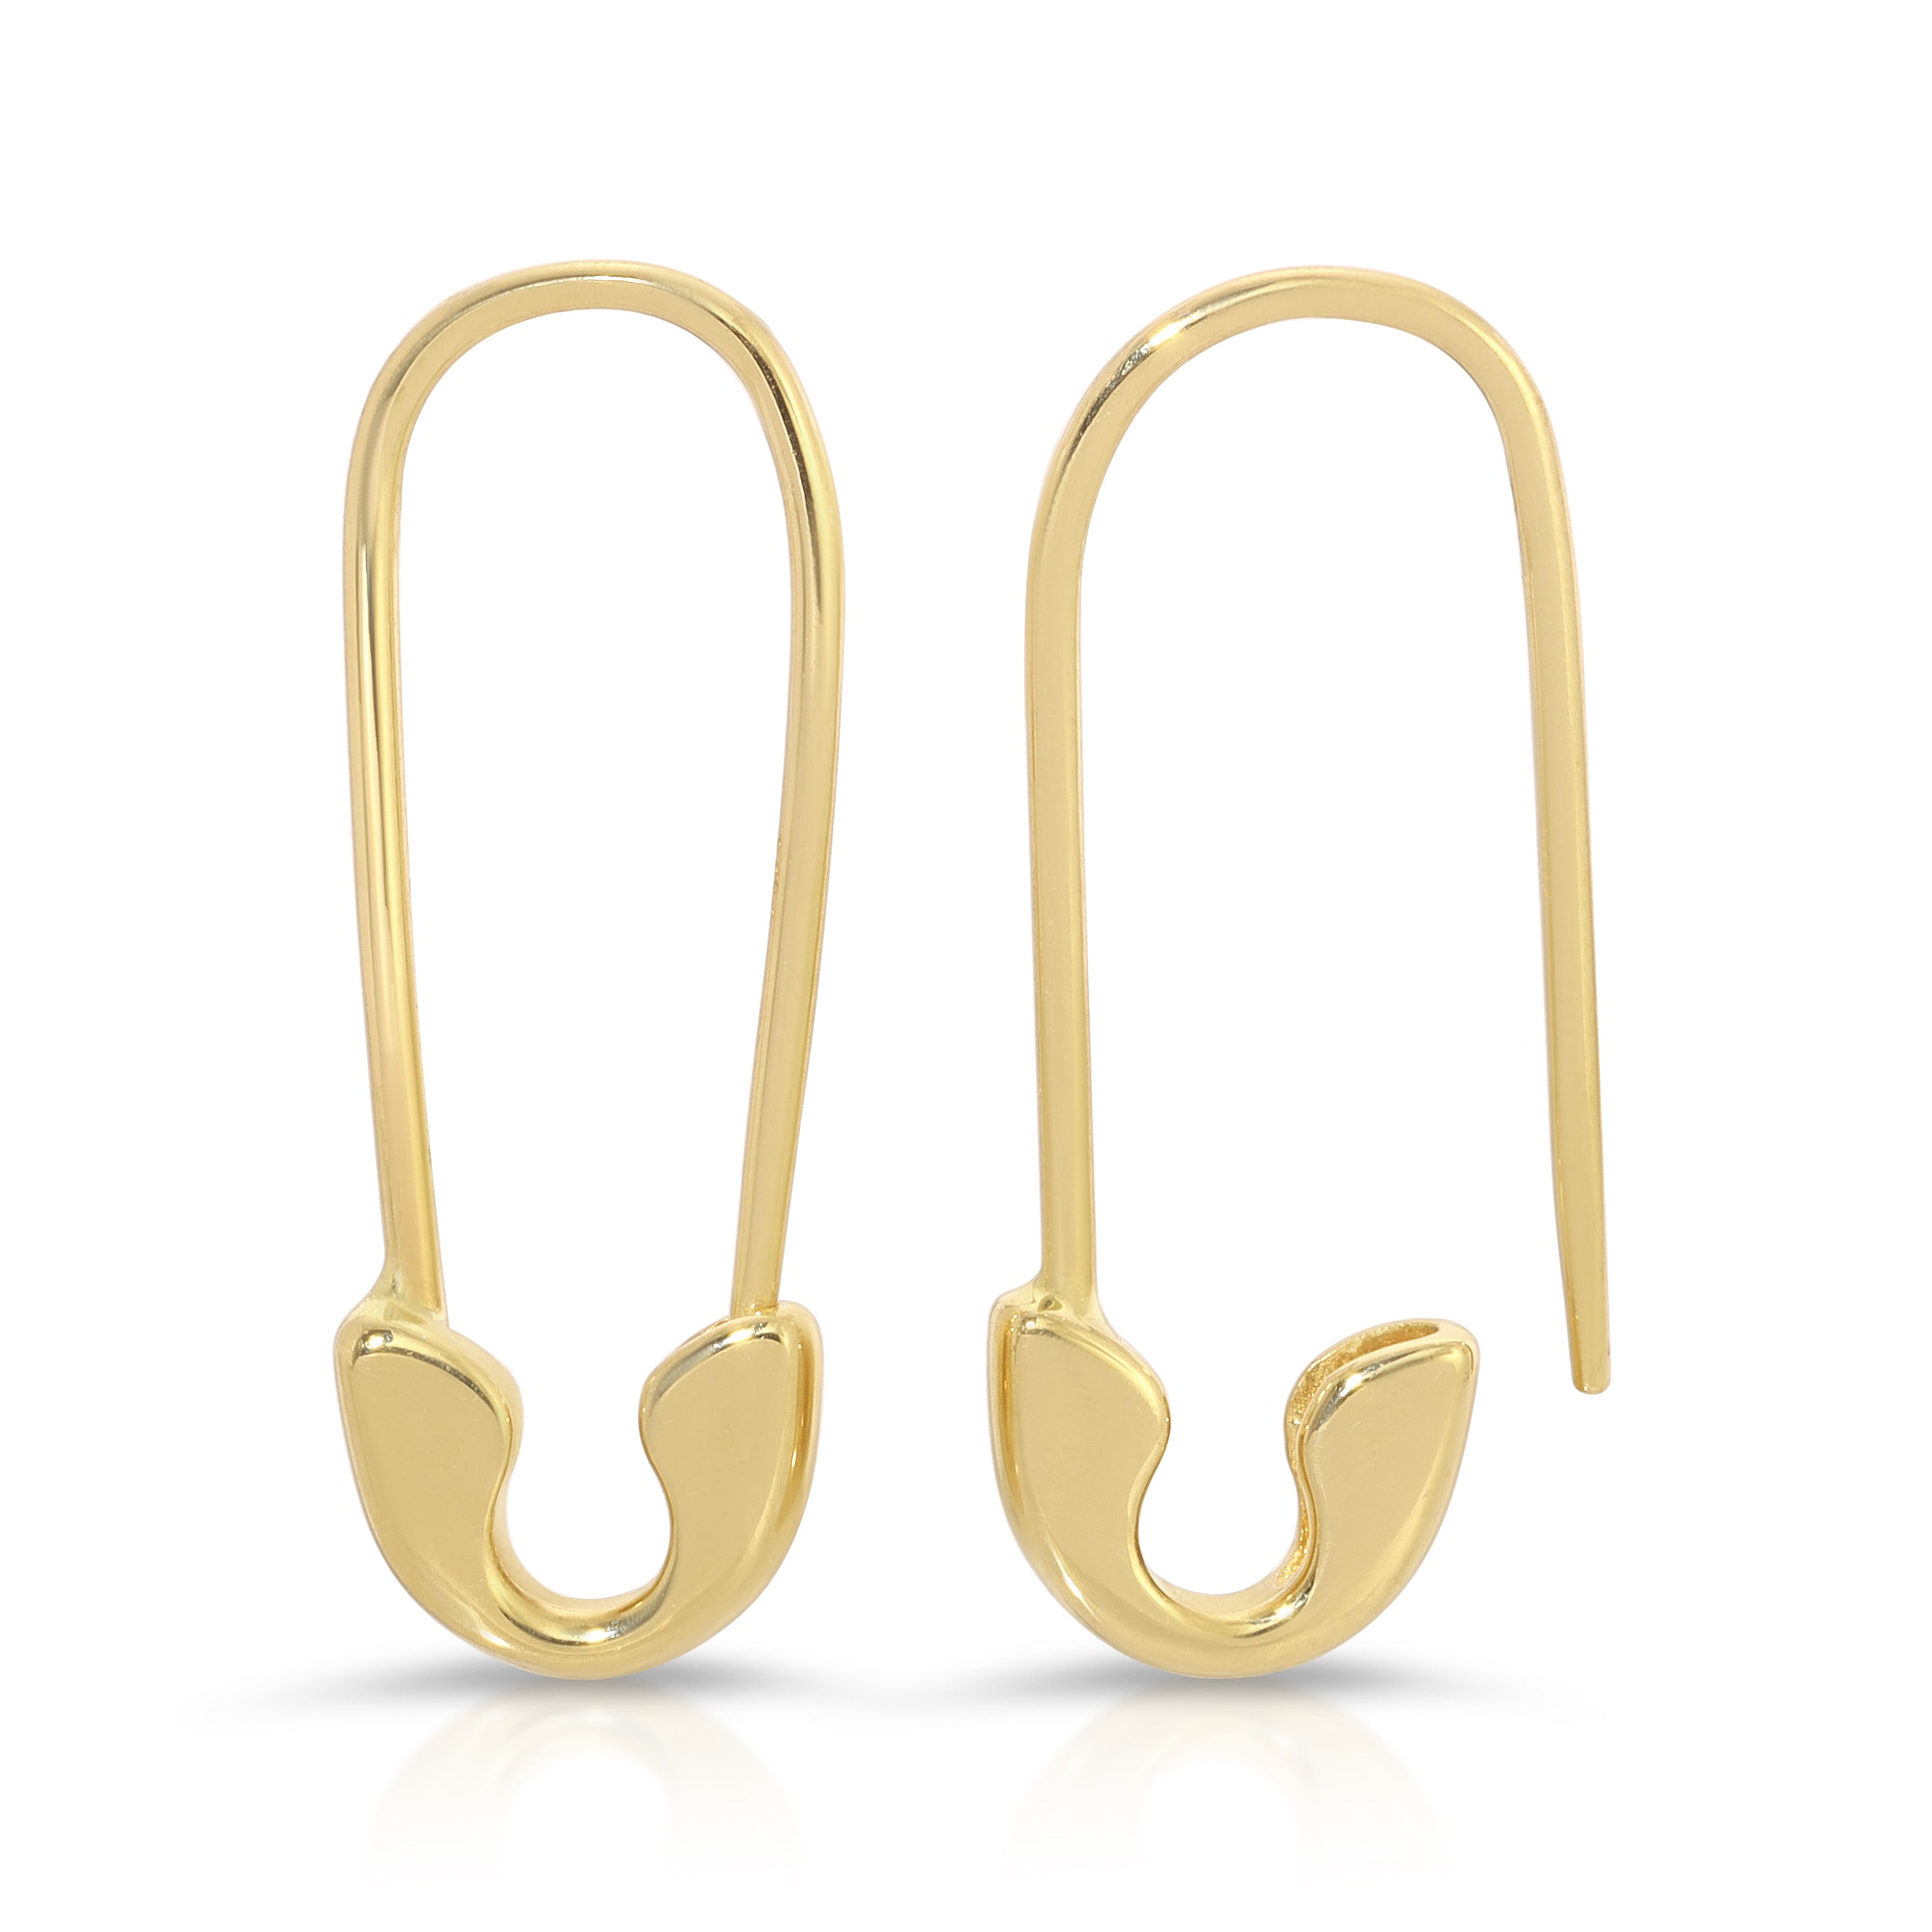 14K YELLOW GOLD LARGE SAFETY PIN EARRINGS